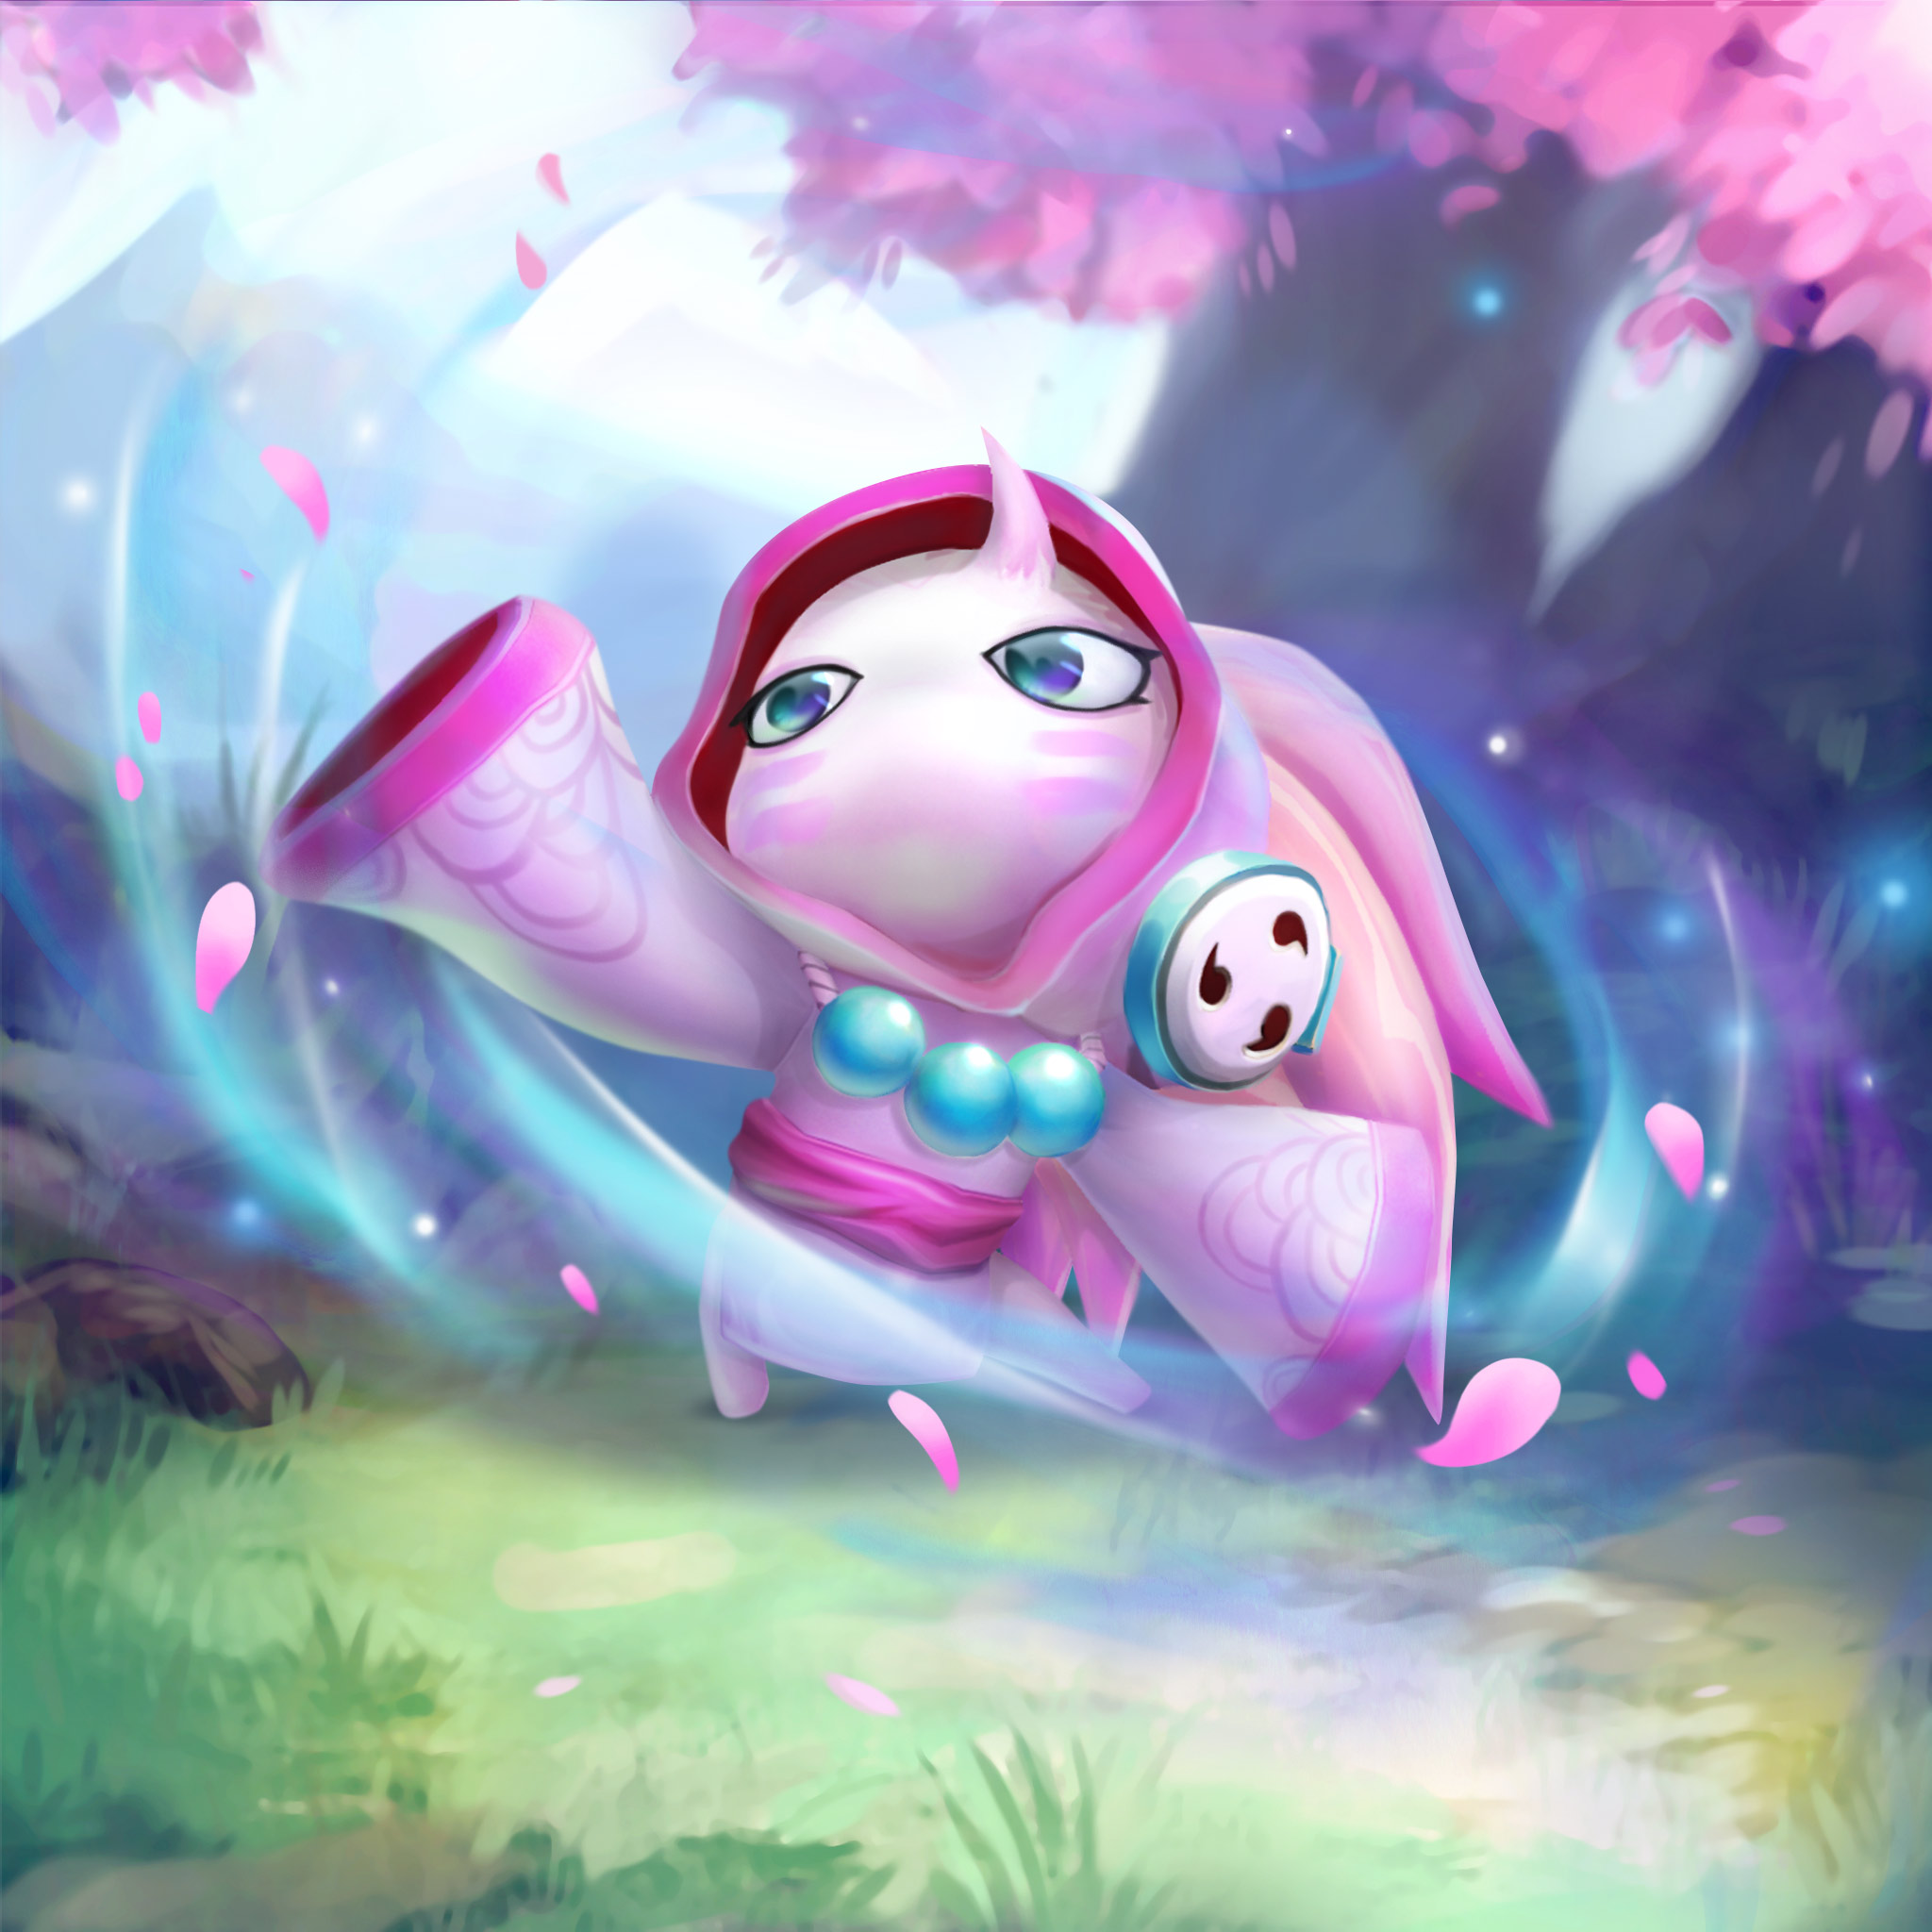 TFT 10.16 Patch notes